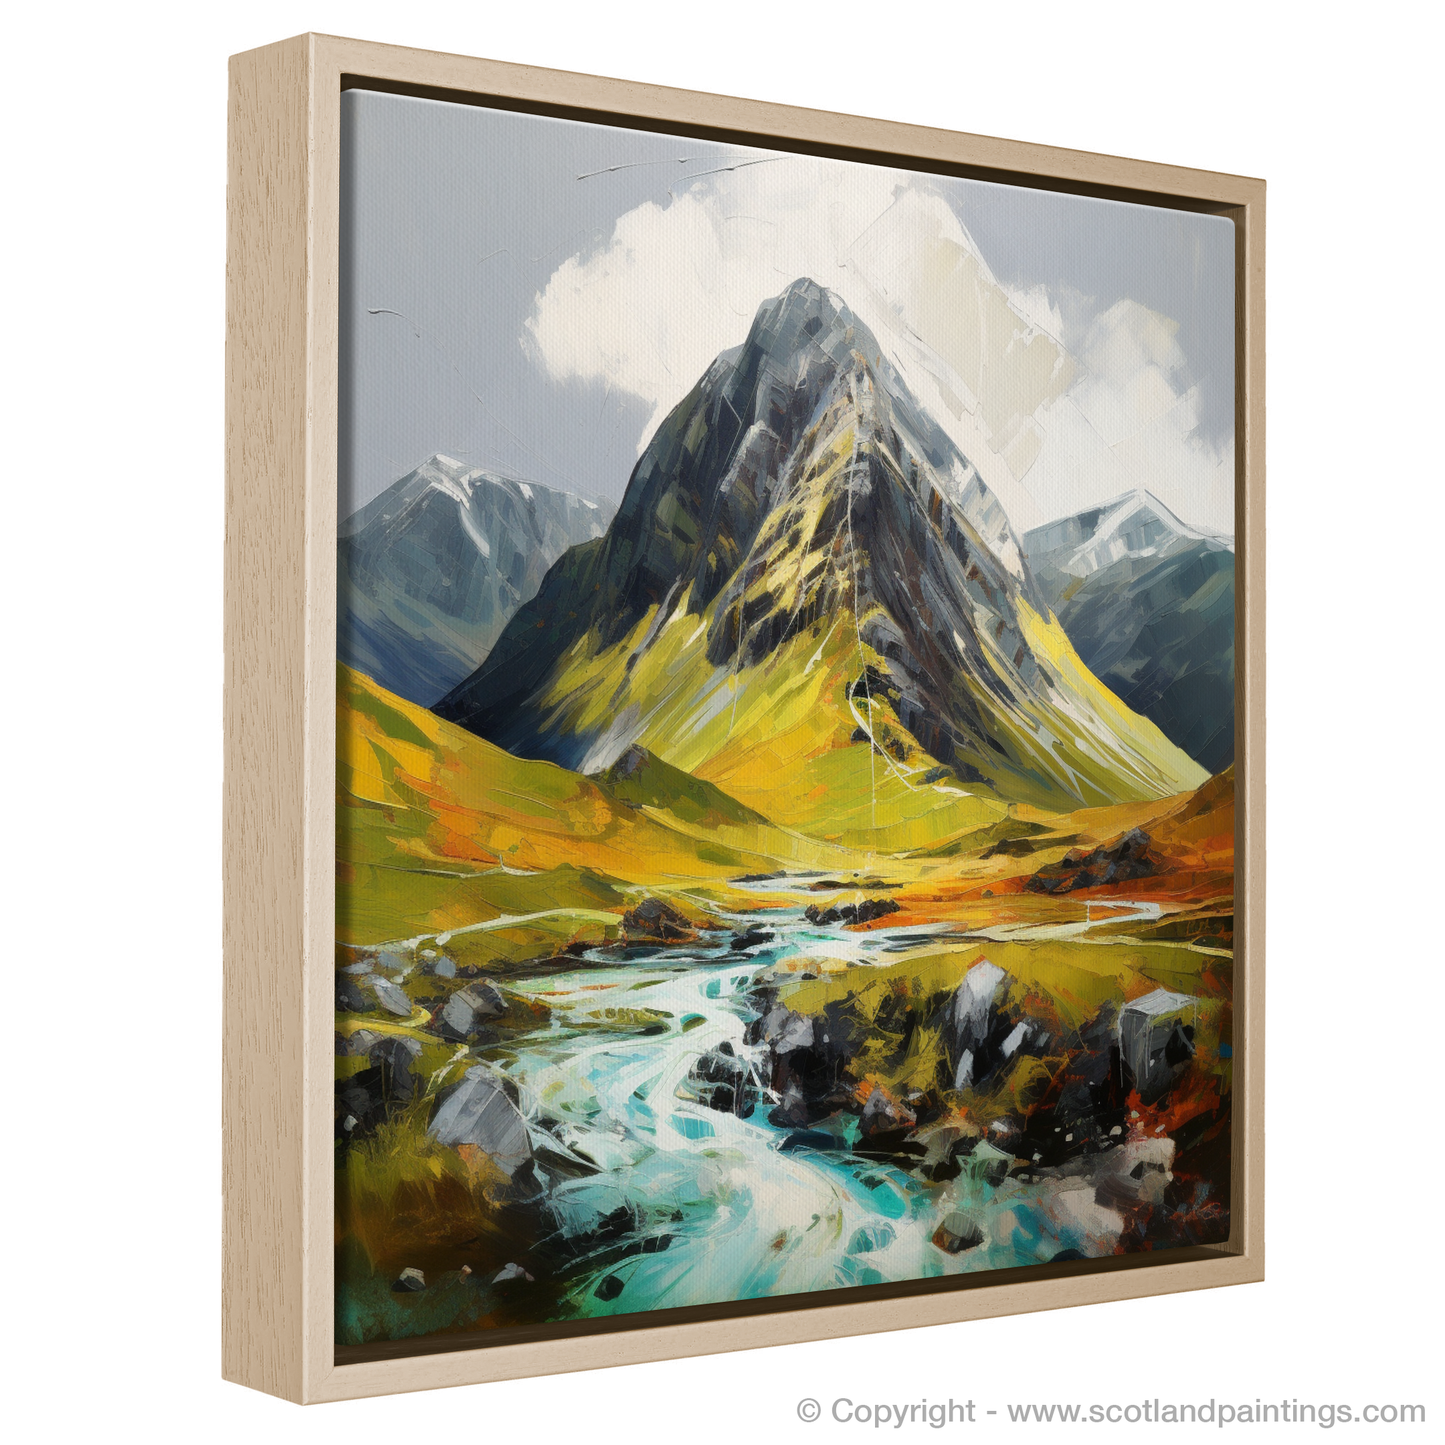 Painting and Art Print of Stob Coire Raineach (Buachaille Etive Beag) entitled "Majestic Raineach: An Expressionist Ode to the Scottish Highlands".